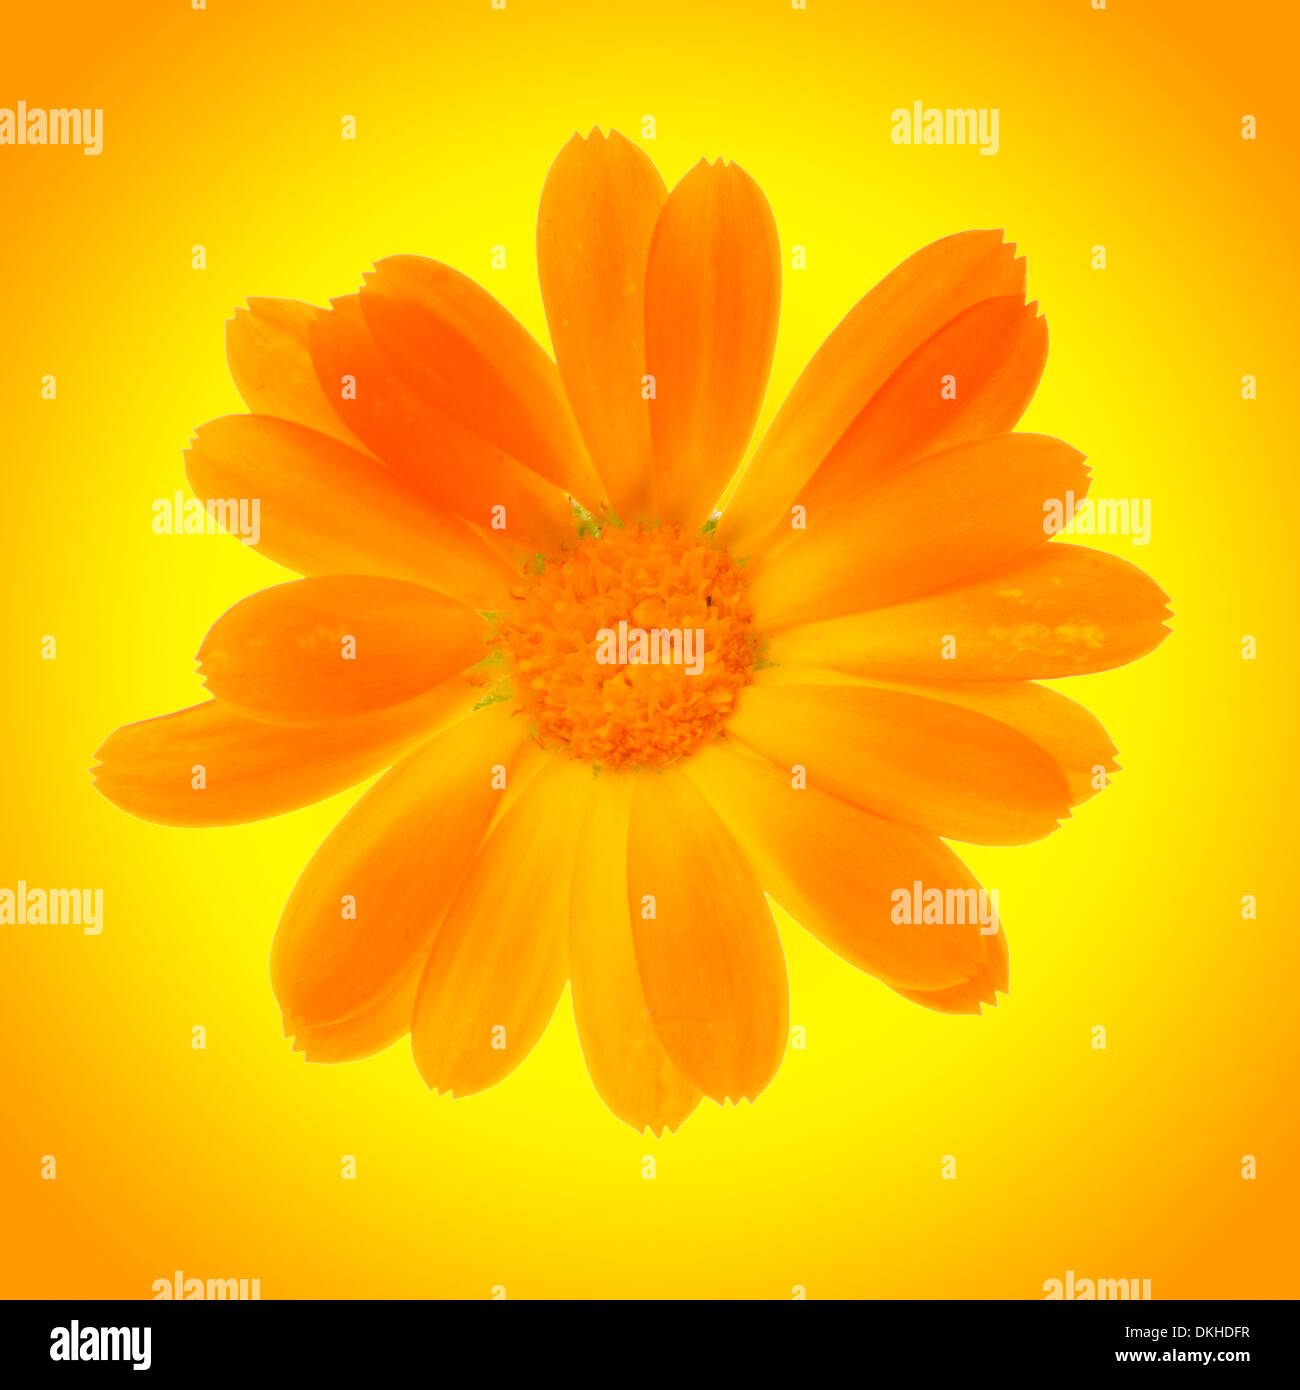 yellow daisy flower isolated on yellow background Stock Photo